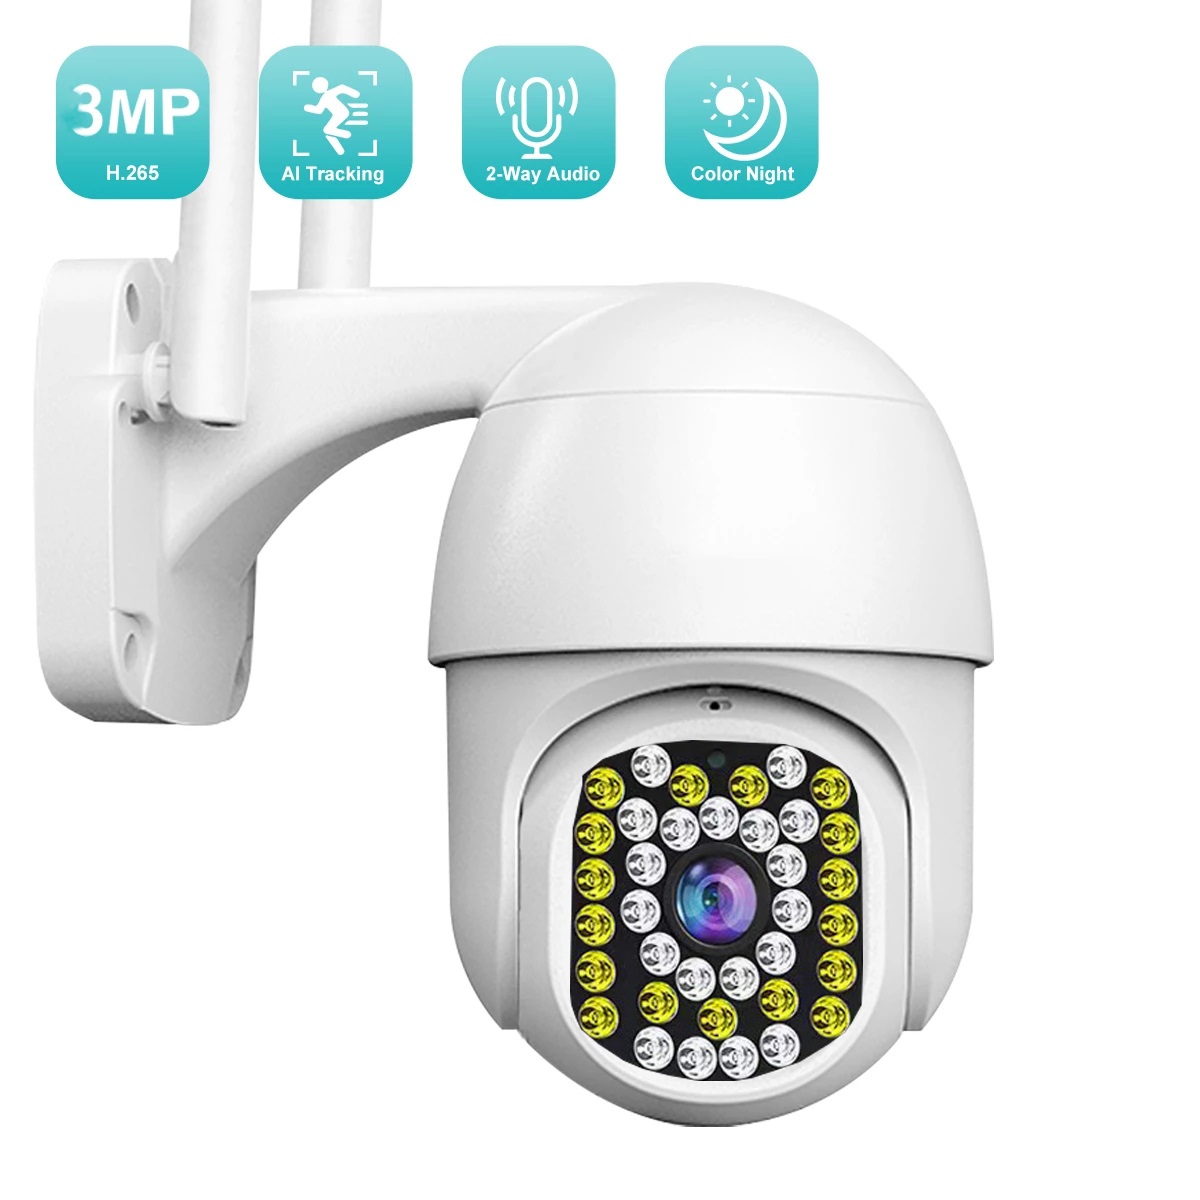 3MP Security Camera WiFi Camera Outdoor Home Security Camera with Spotlight Night Vision,Alarm,Remote Access,Motion Detection,2-Way Audio